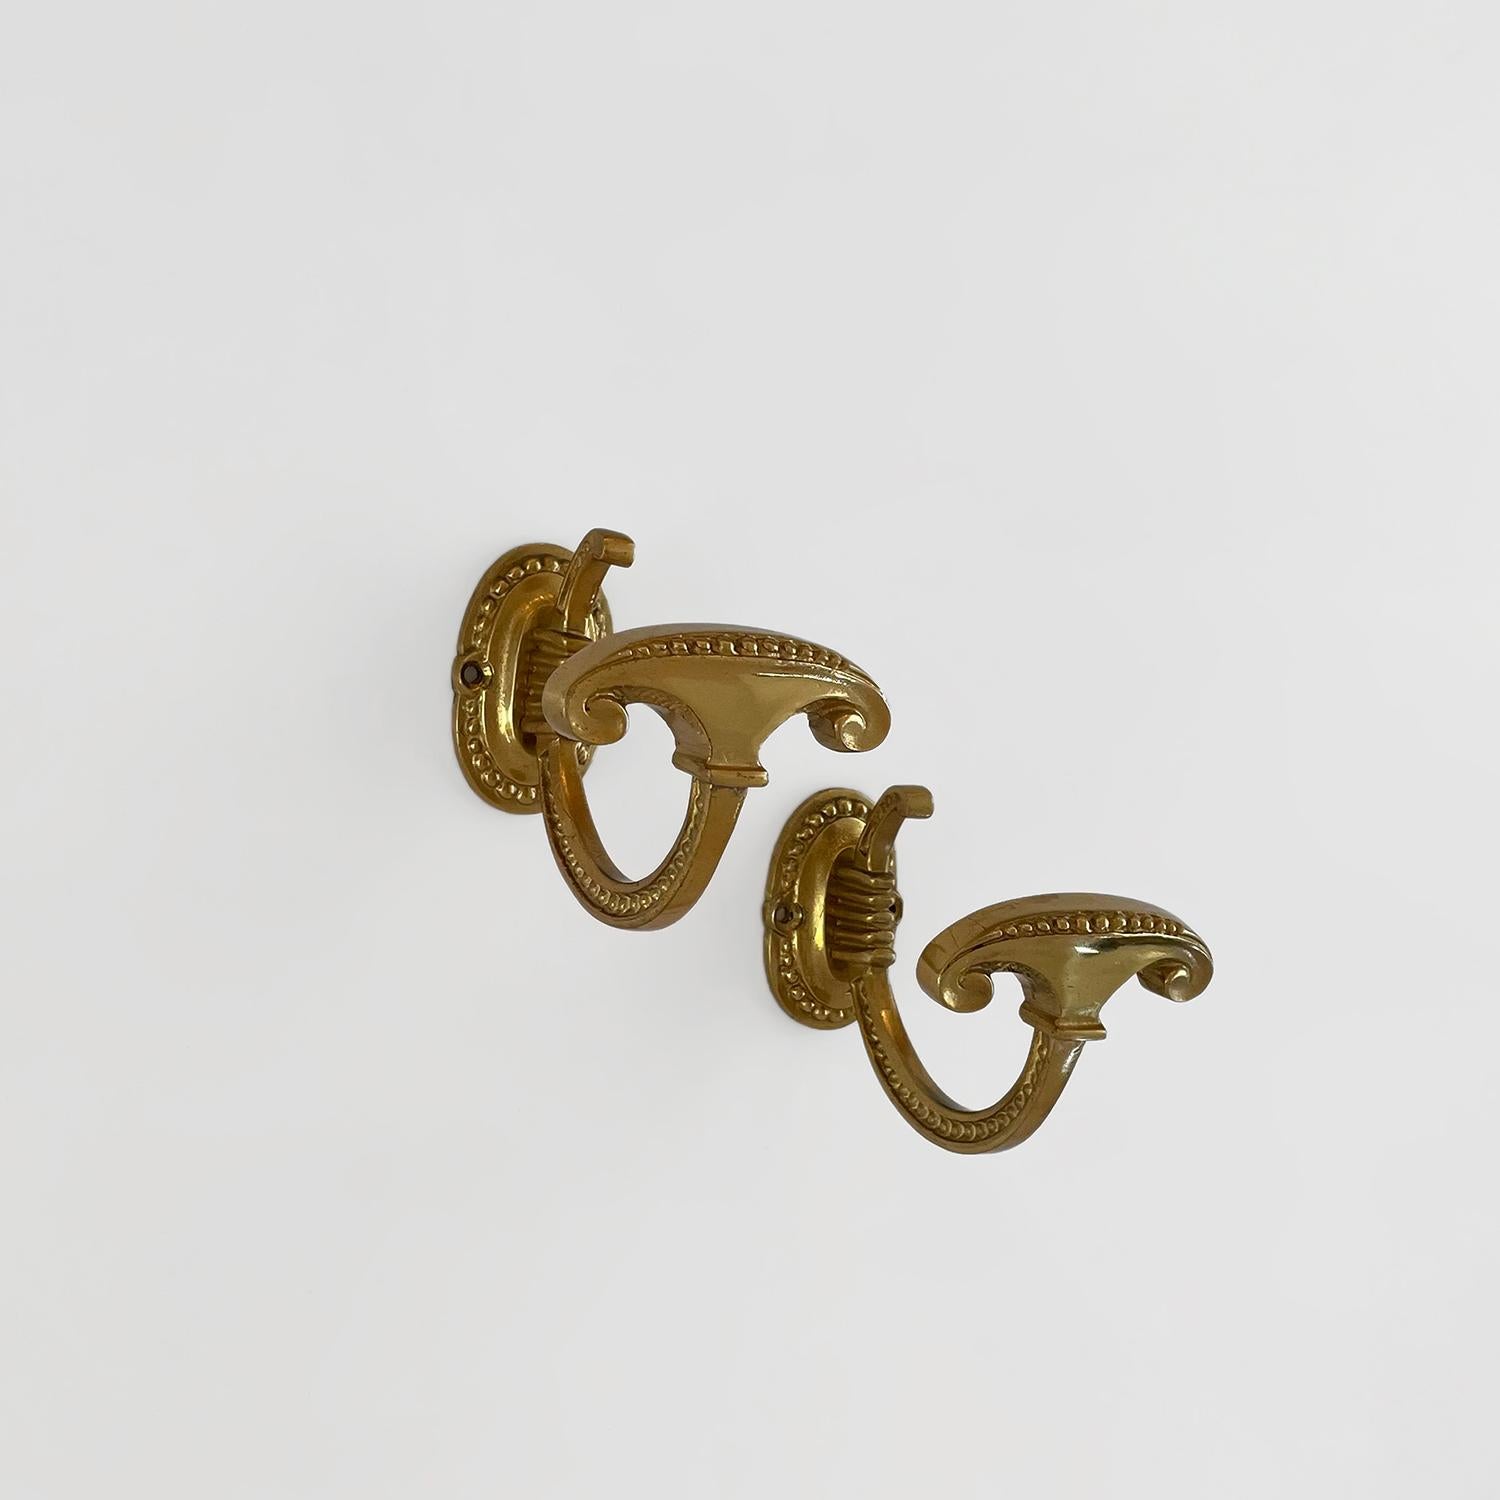 Pair of French ornamental brass wall hooks
France, mid century
These beautifully sculpted brass wall hooks are whimsical and elegant at the same time
Petite J hooks delicately float while being suspended from decorated brackets
Each wall mounted